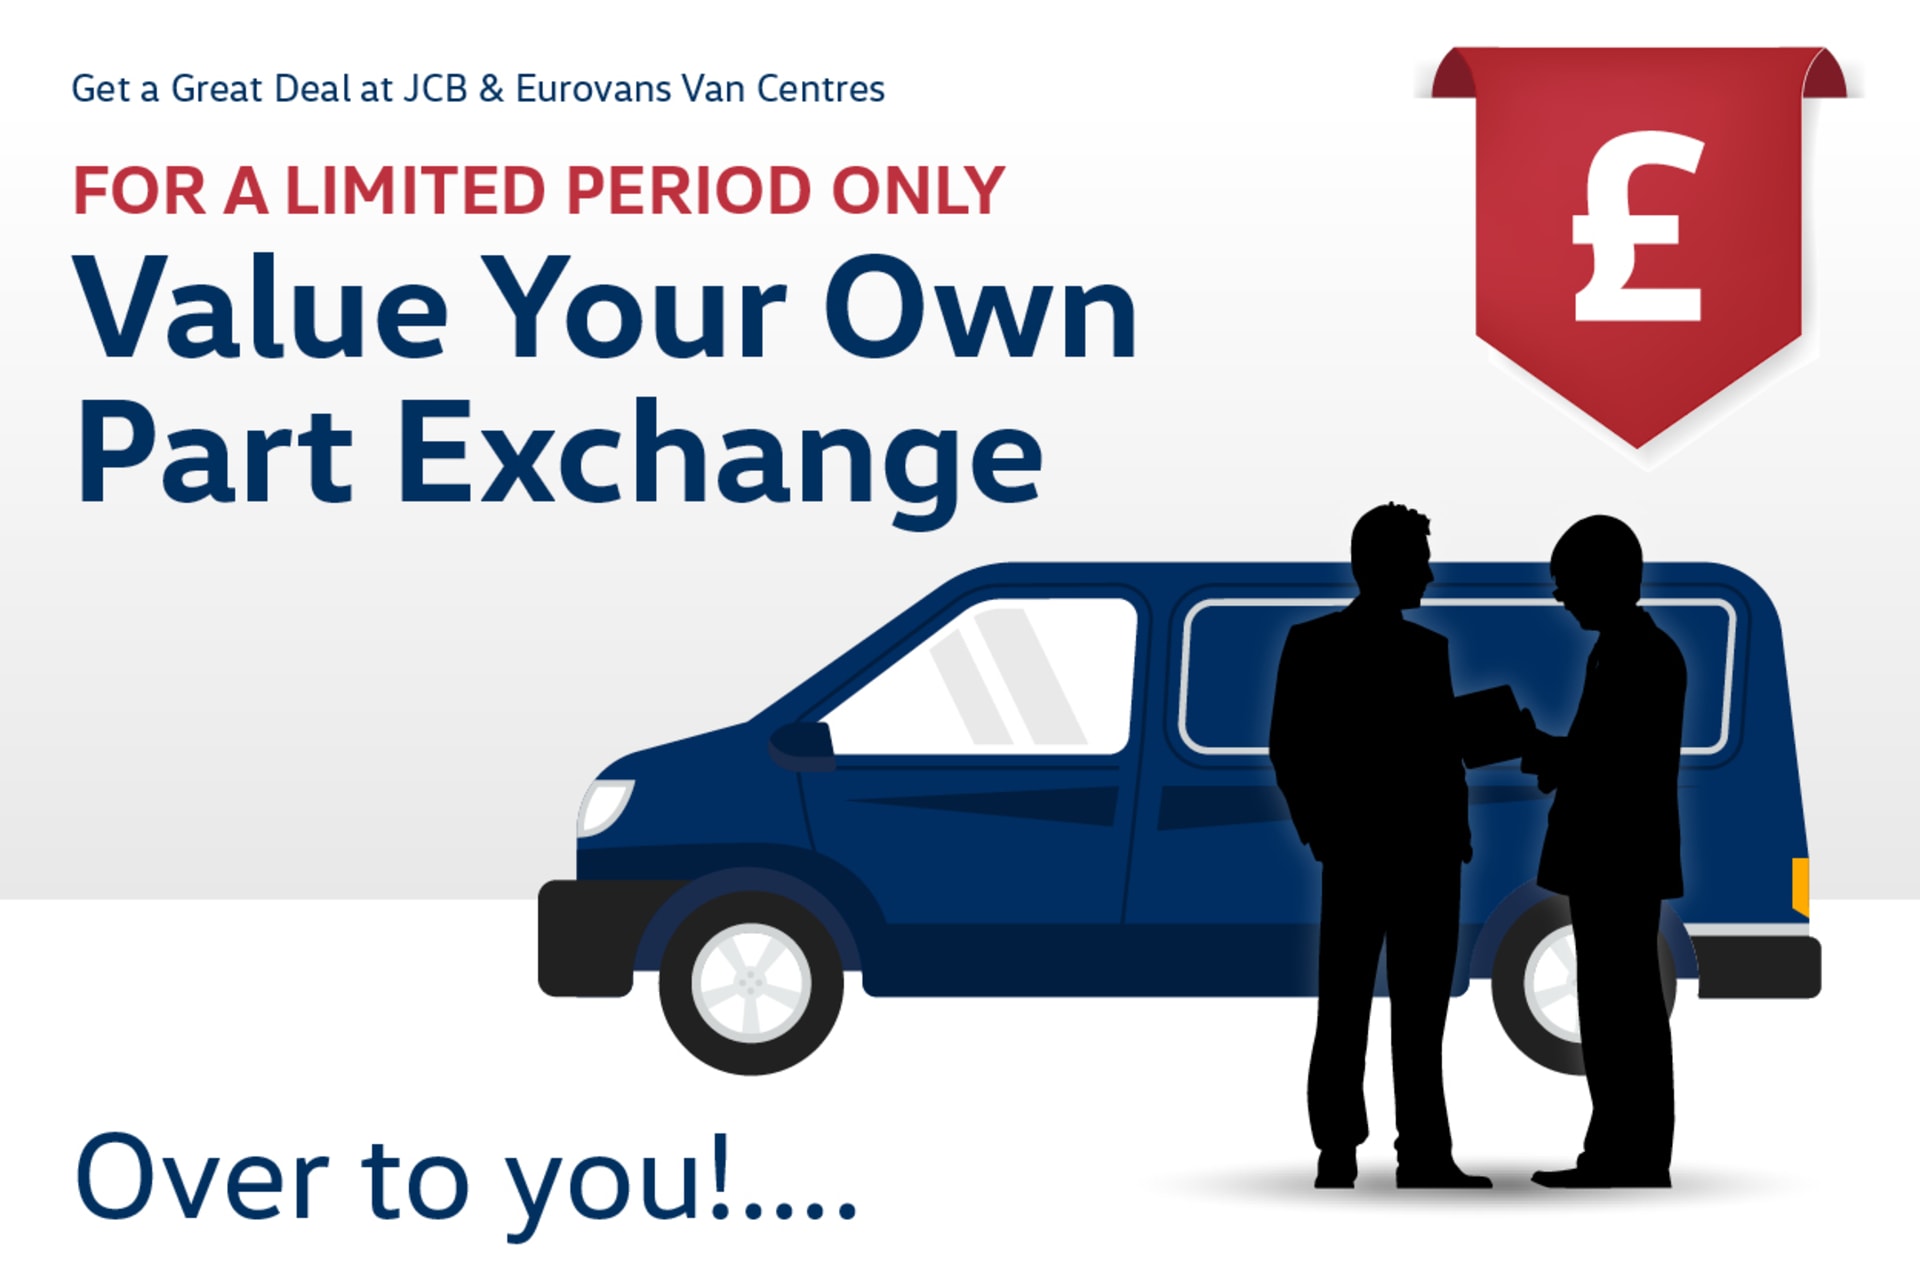 Value Your Own Part Exchange